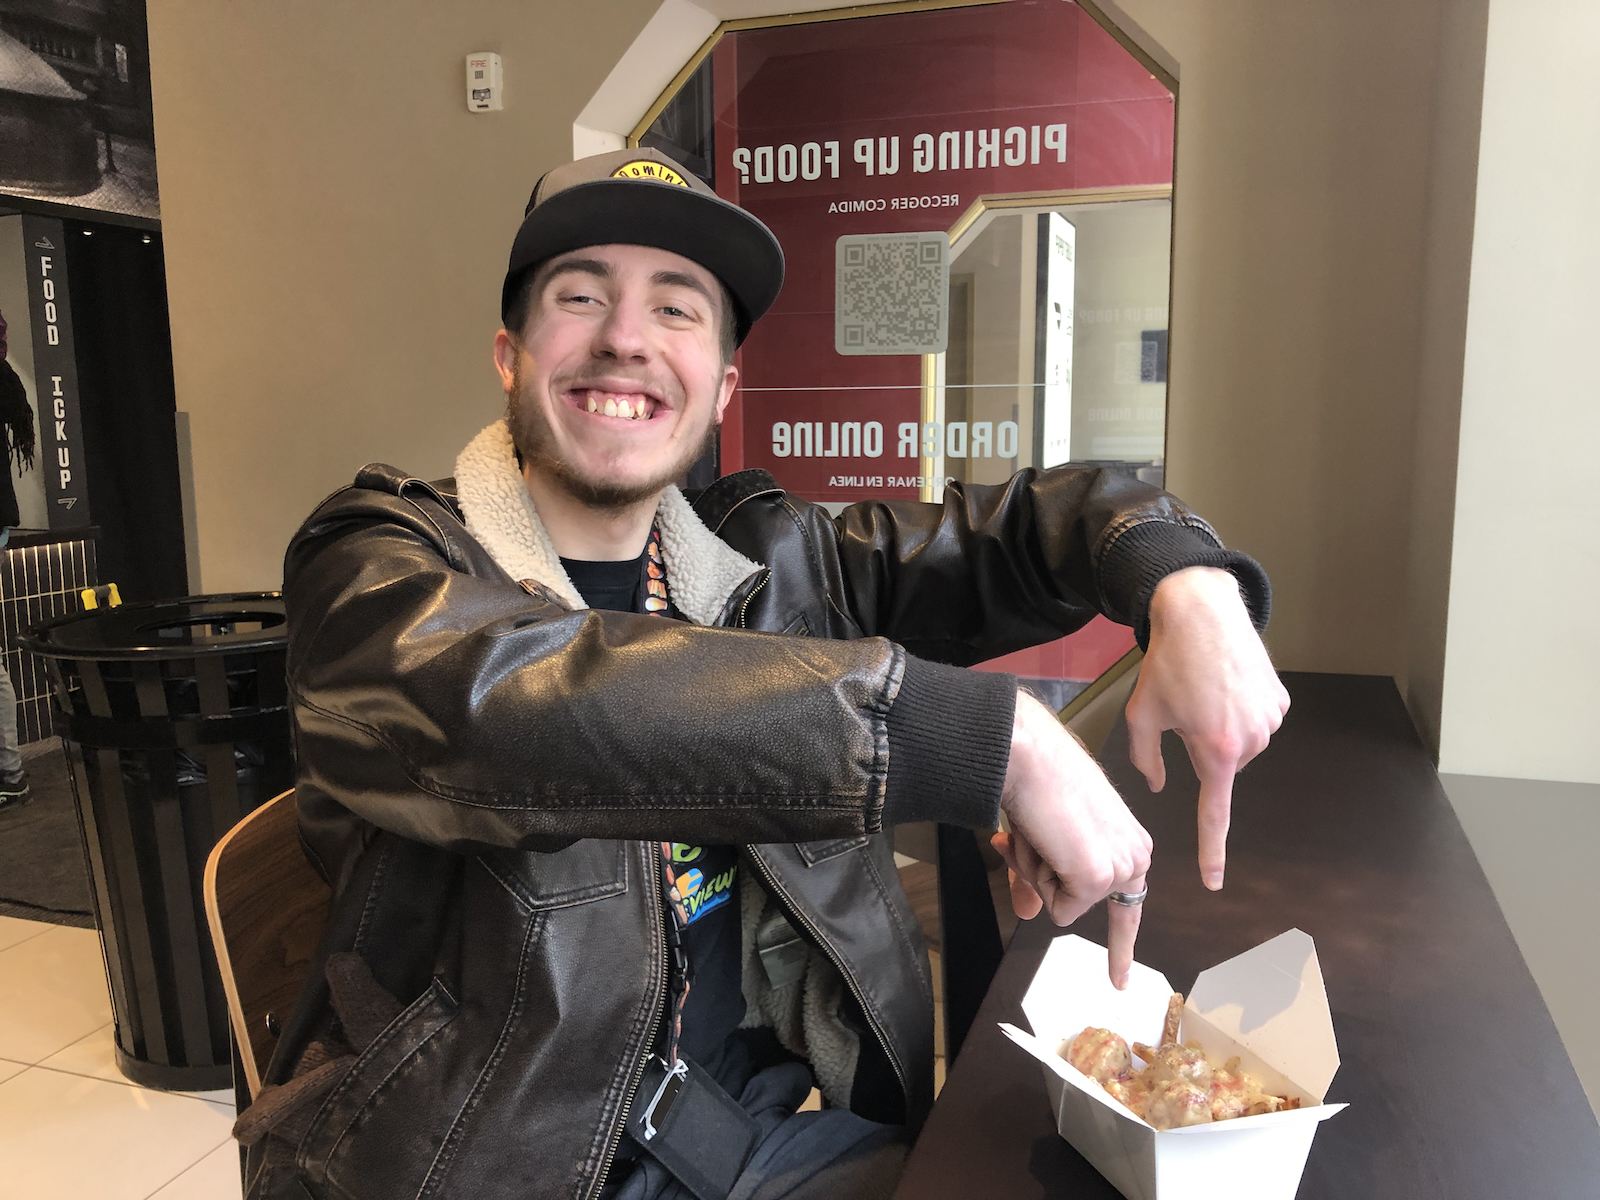 Dominic and his poutine